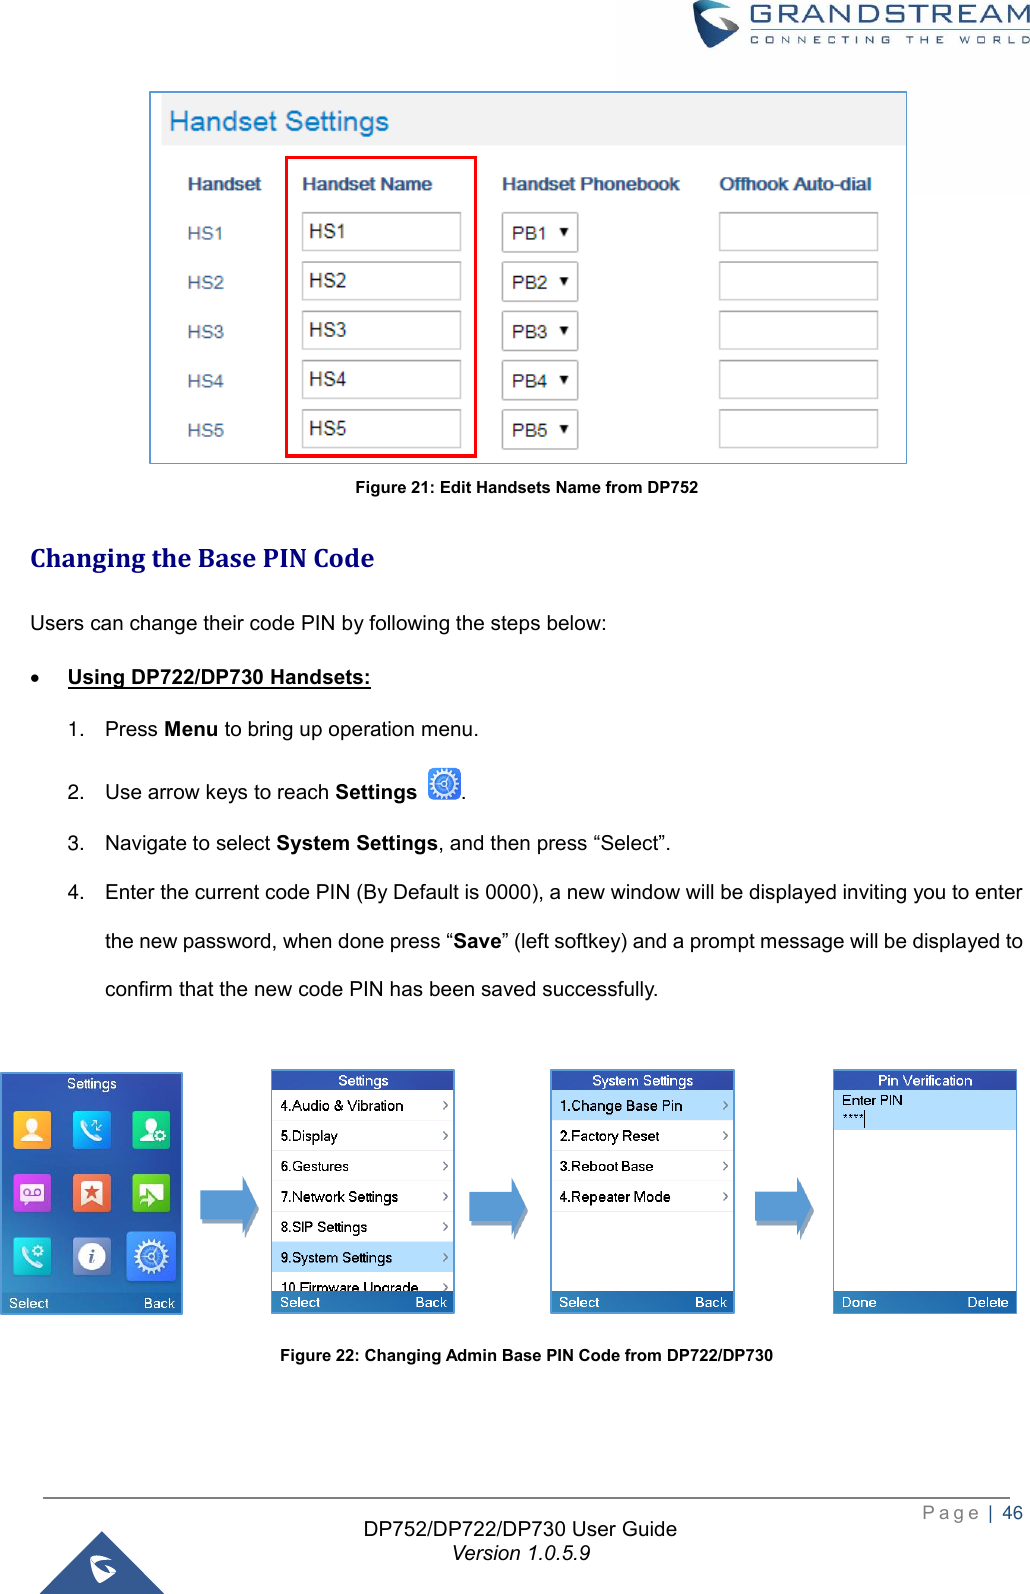  P a g e  |  46   DP752/DP722/DP730 User Guide Version 1.0.5.9    Figure 21: Edit Handsets Name from DP752 Changing the Base PIN Code Users can change their code PIN by following the steps below: • Using DP722/DP730 Handsets: 1. Press Menu to bring up operation menu.   2. Use arrow keys to reach Settings  . 3. Navigate to select System Settings, and then press “Select”.  4. Enter the current code PIN (By Default is 0000), a new window will be displayed inviting you to enter the new password, when done press “Save” (left softkey) and a prompt message will be displayed to confirm that the new code PIN has been saved successfully.                       Figure 22: Changing Admin Base PIN Code from DP722/DP730   